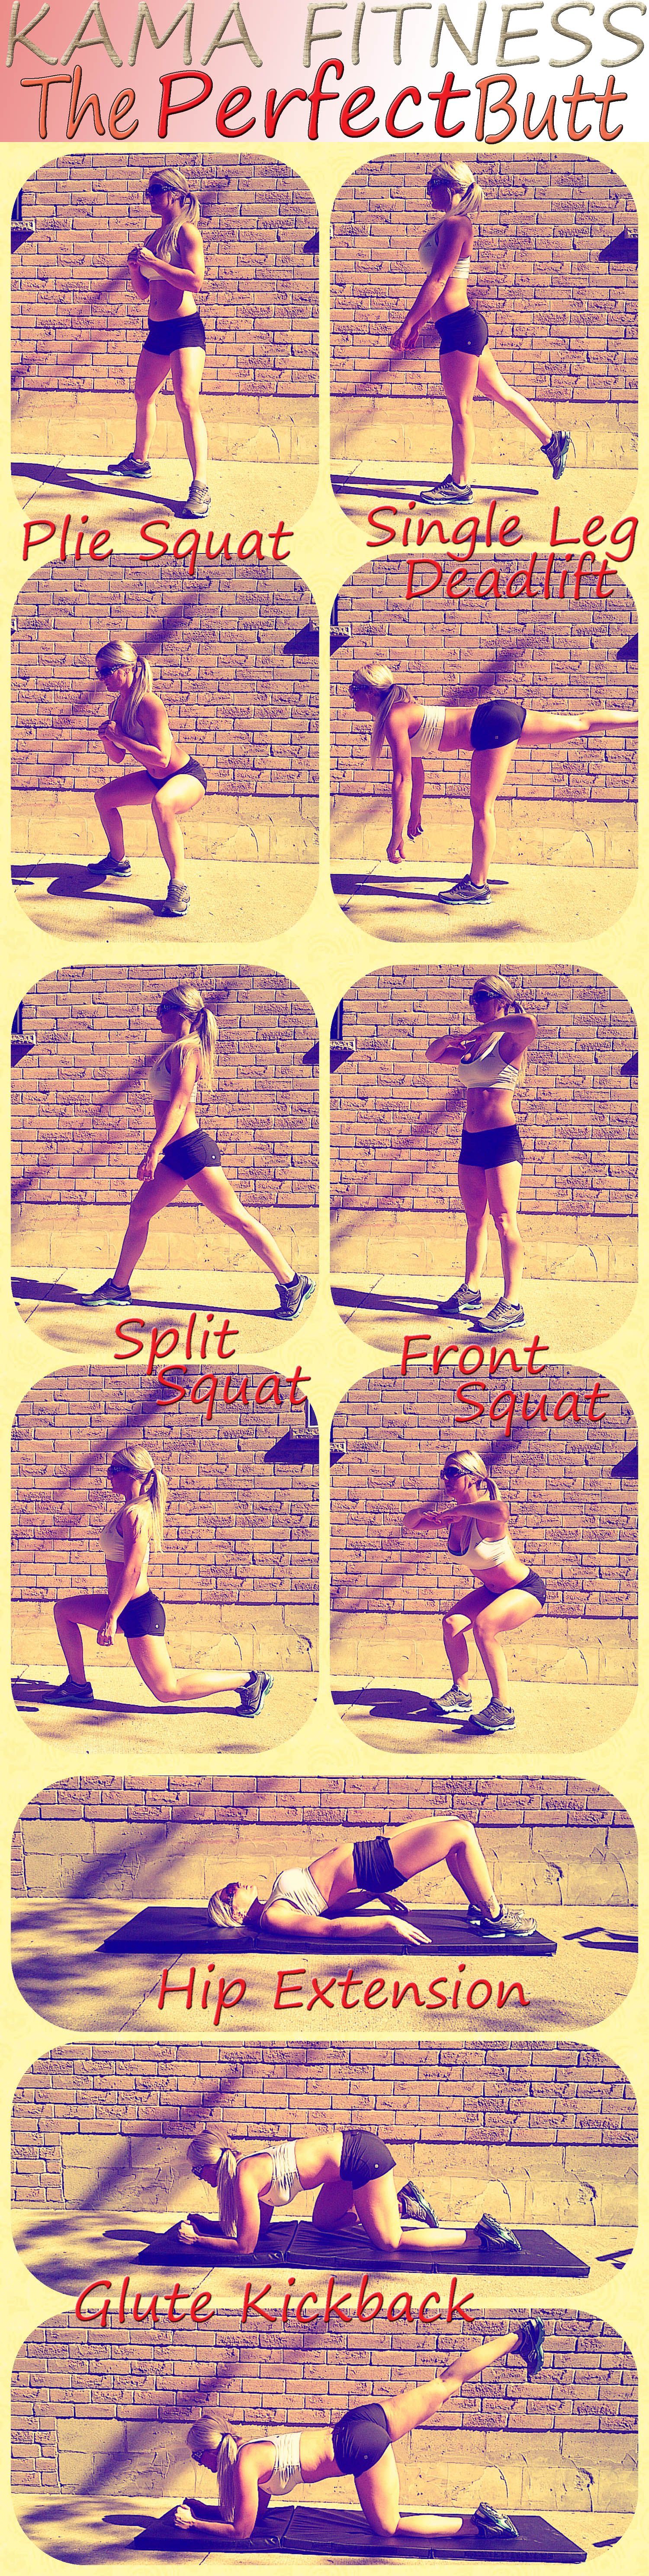 The Perfect Butt Workout – already been doing part of this! Hurts so good!